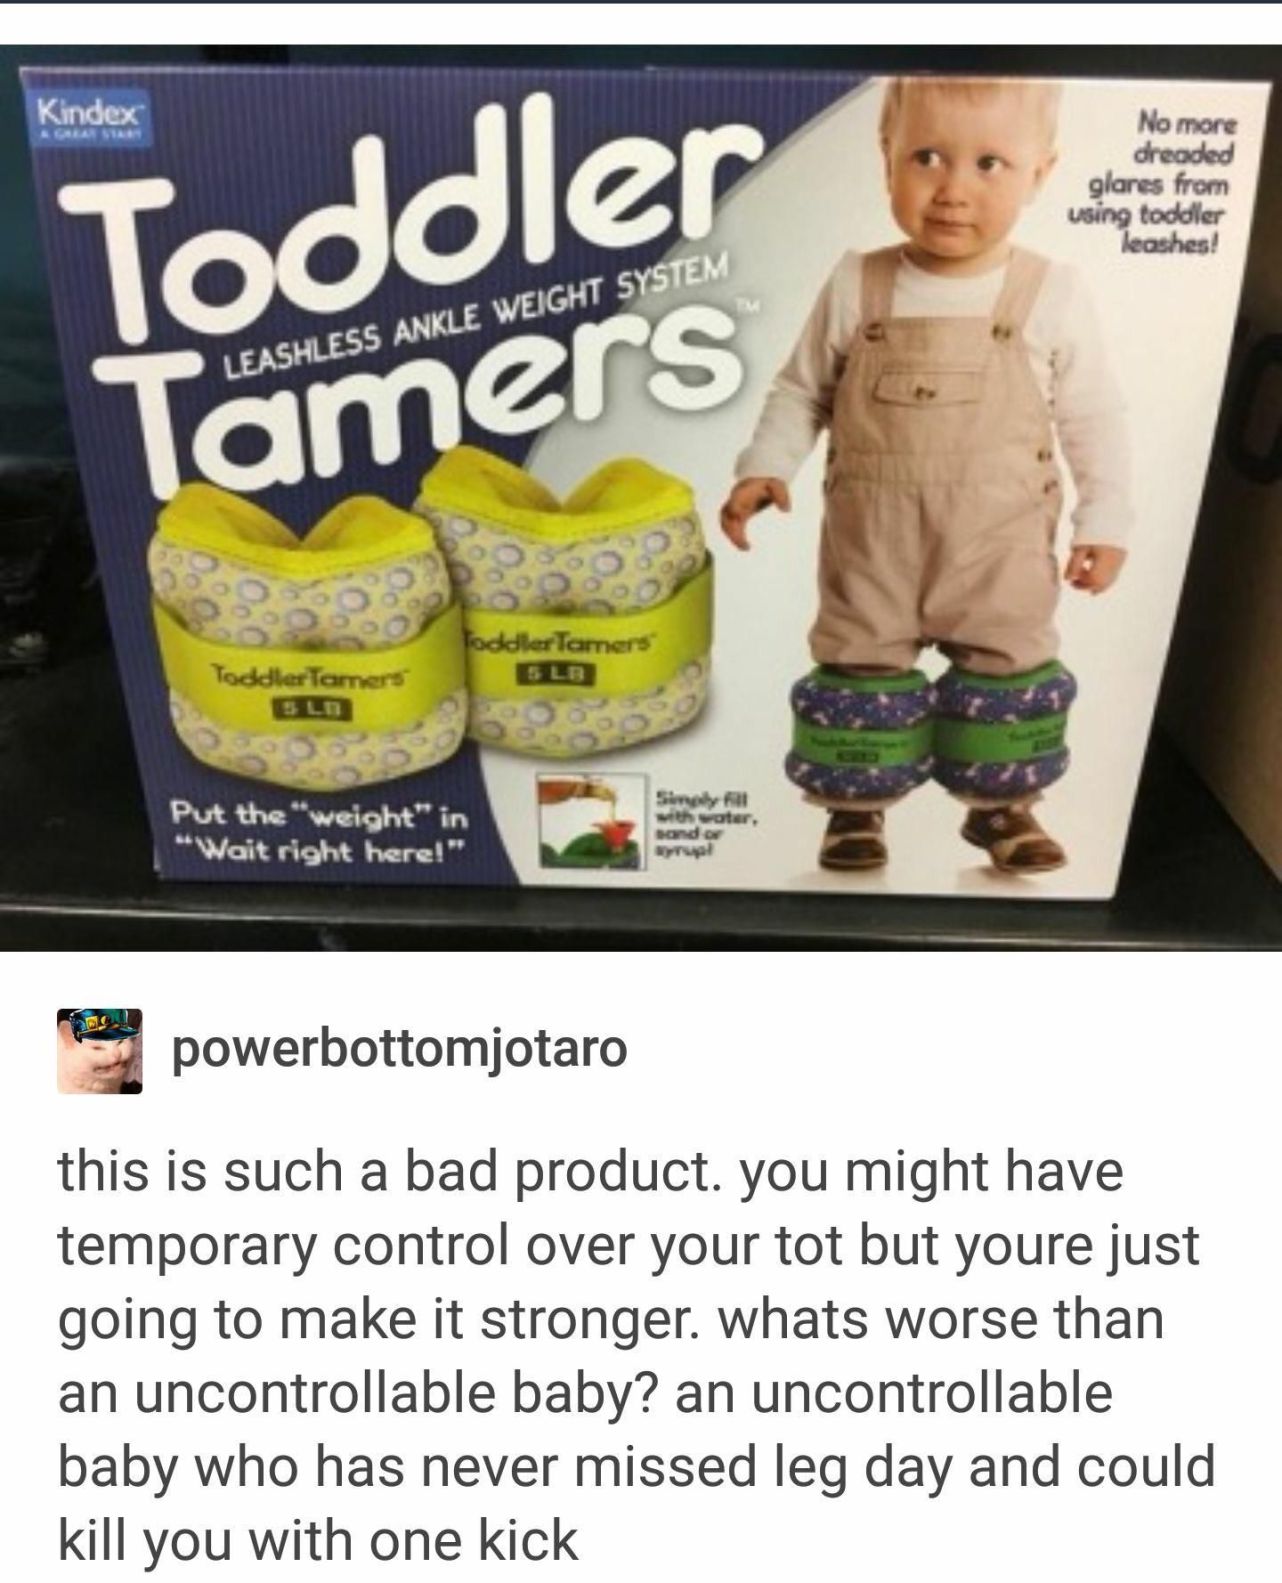 toddler tamers meme - Kindex No more dreaded glares from using toddler leashes! Toddlers Tamers Leashless Ankle Weight System Toddler Tamers Toddler Tamers Sun Put the "weight" in "Wait right here!" with water, sondo powerbottomjotaro this is such a bad p